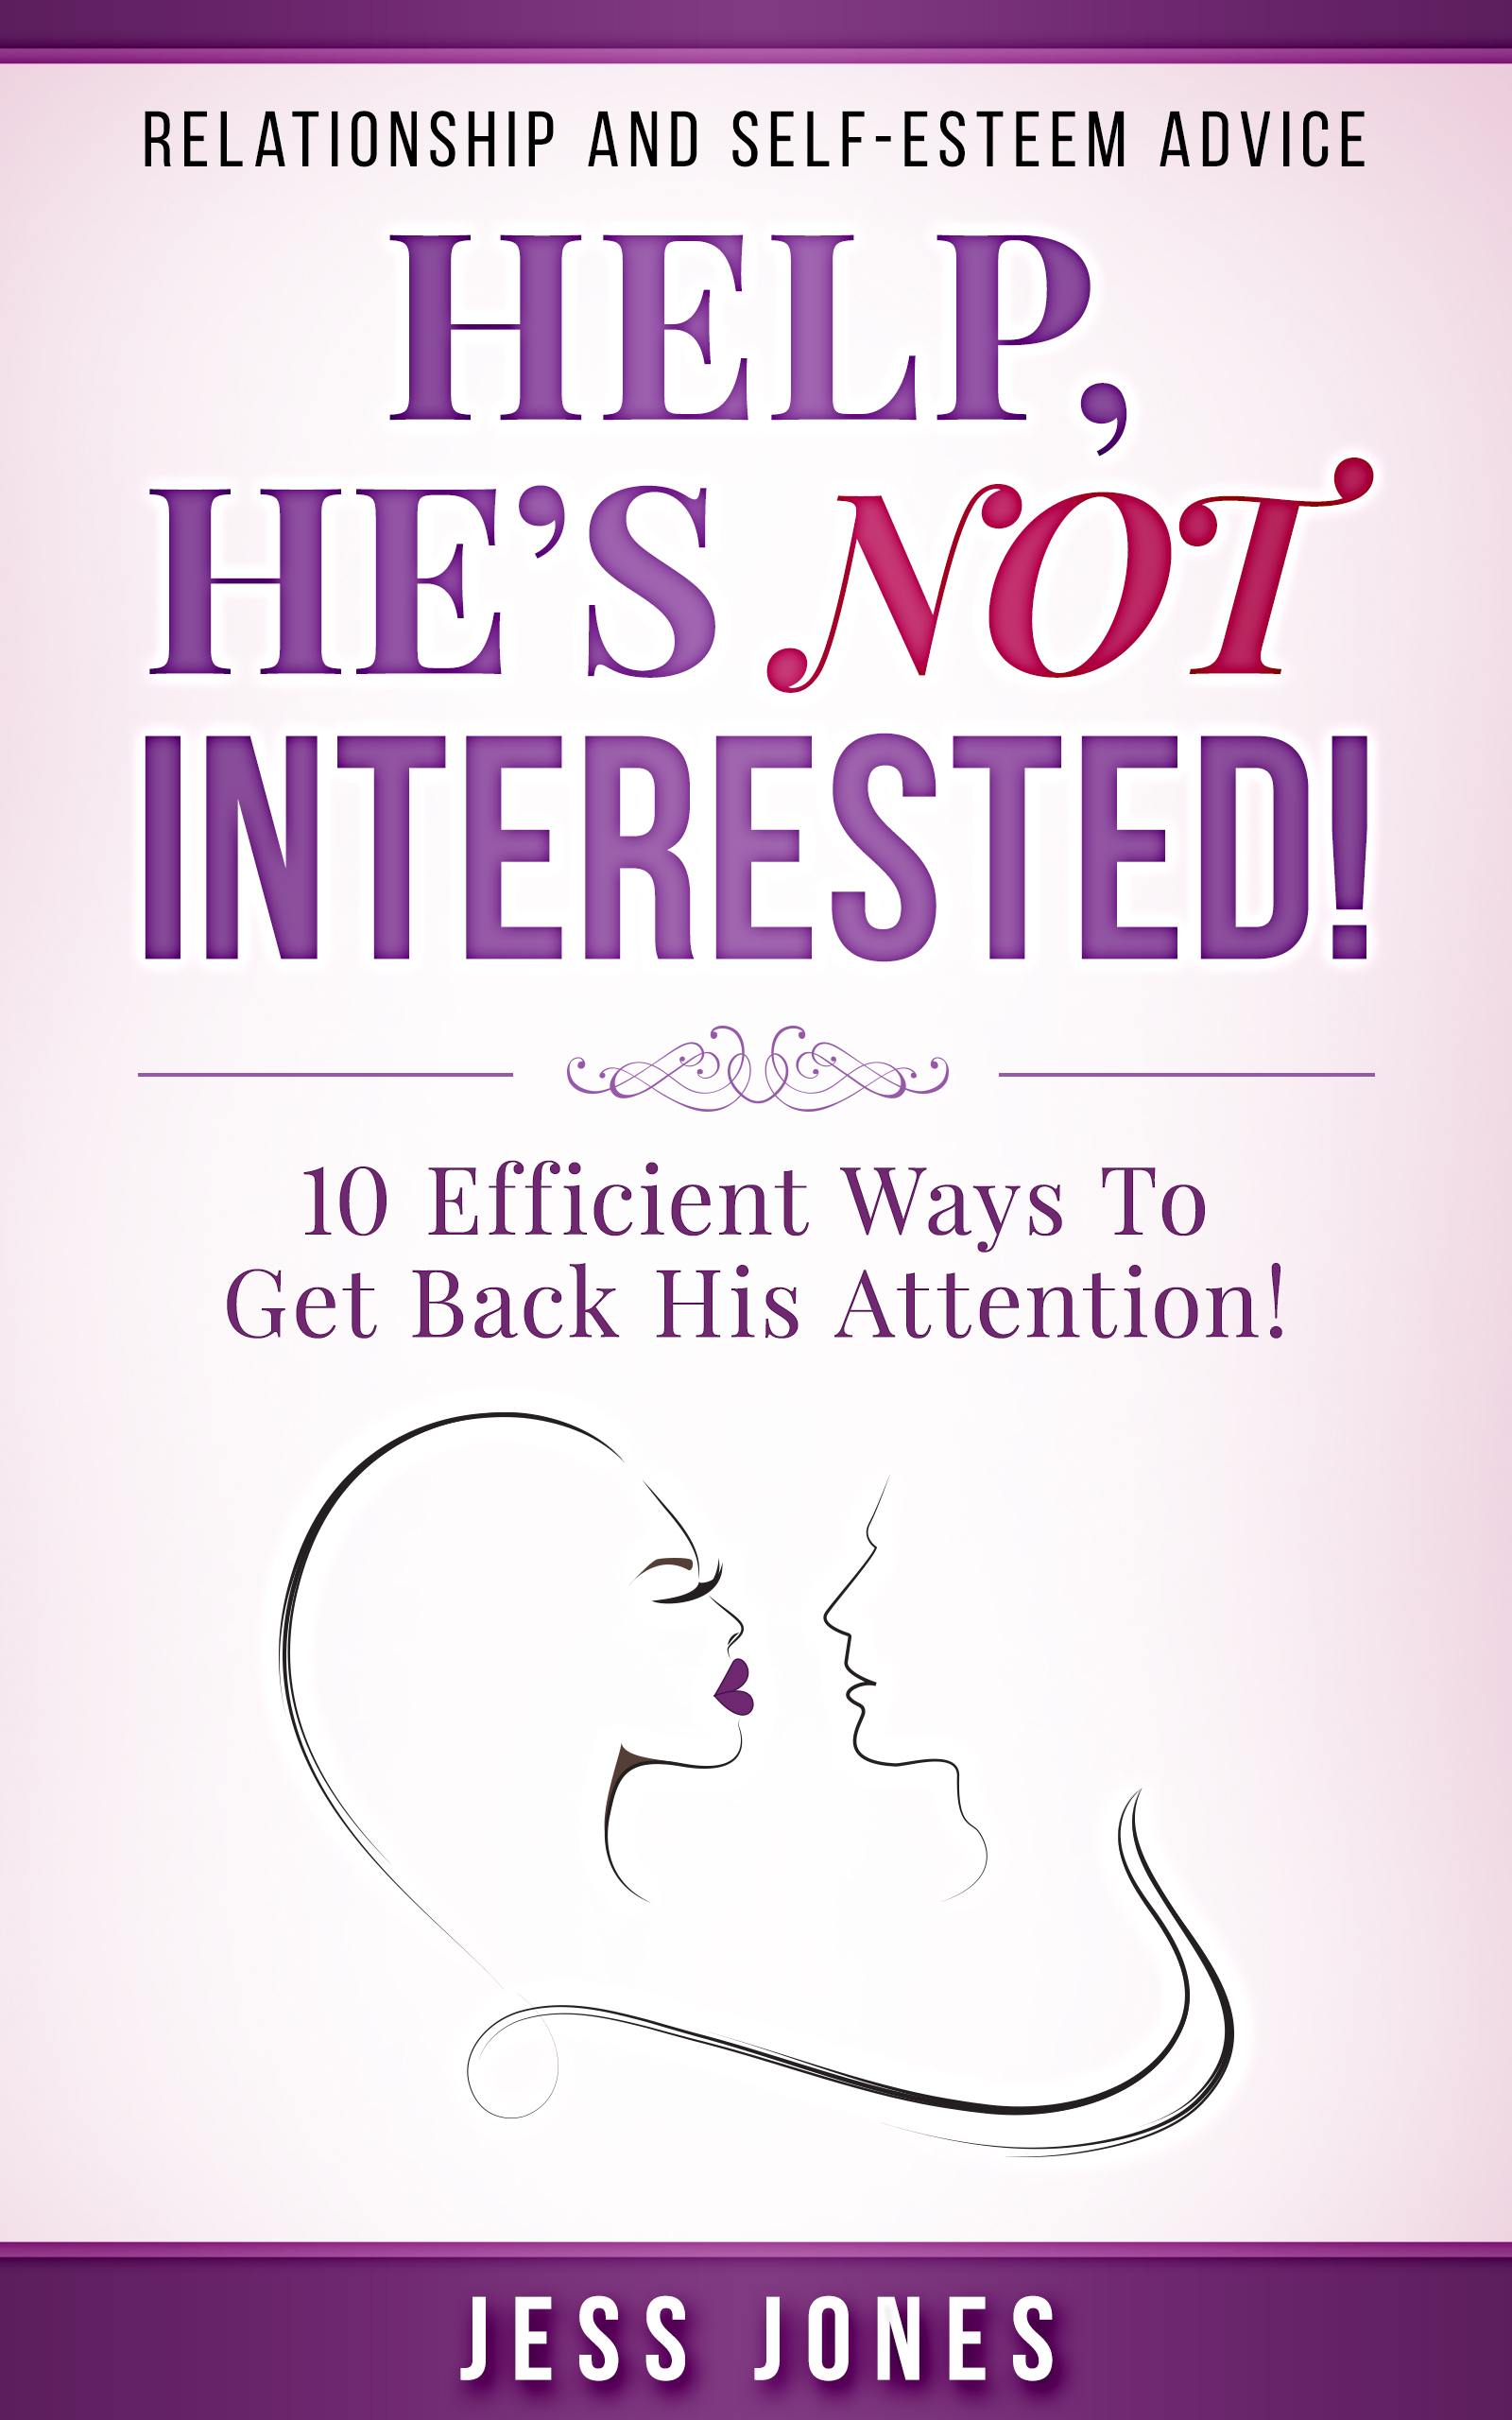 FREE: Help, He’s Not Interested!: 10 Efficient Ways To Get Back His Attention! by Jess Jones